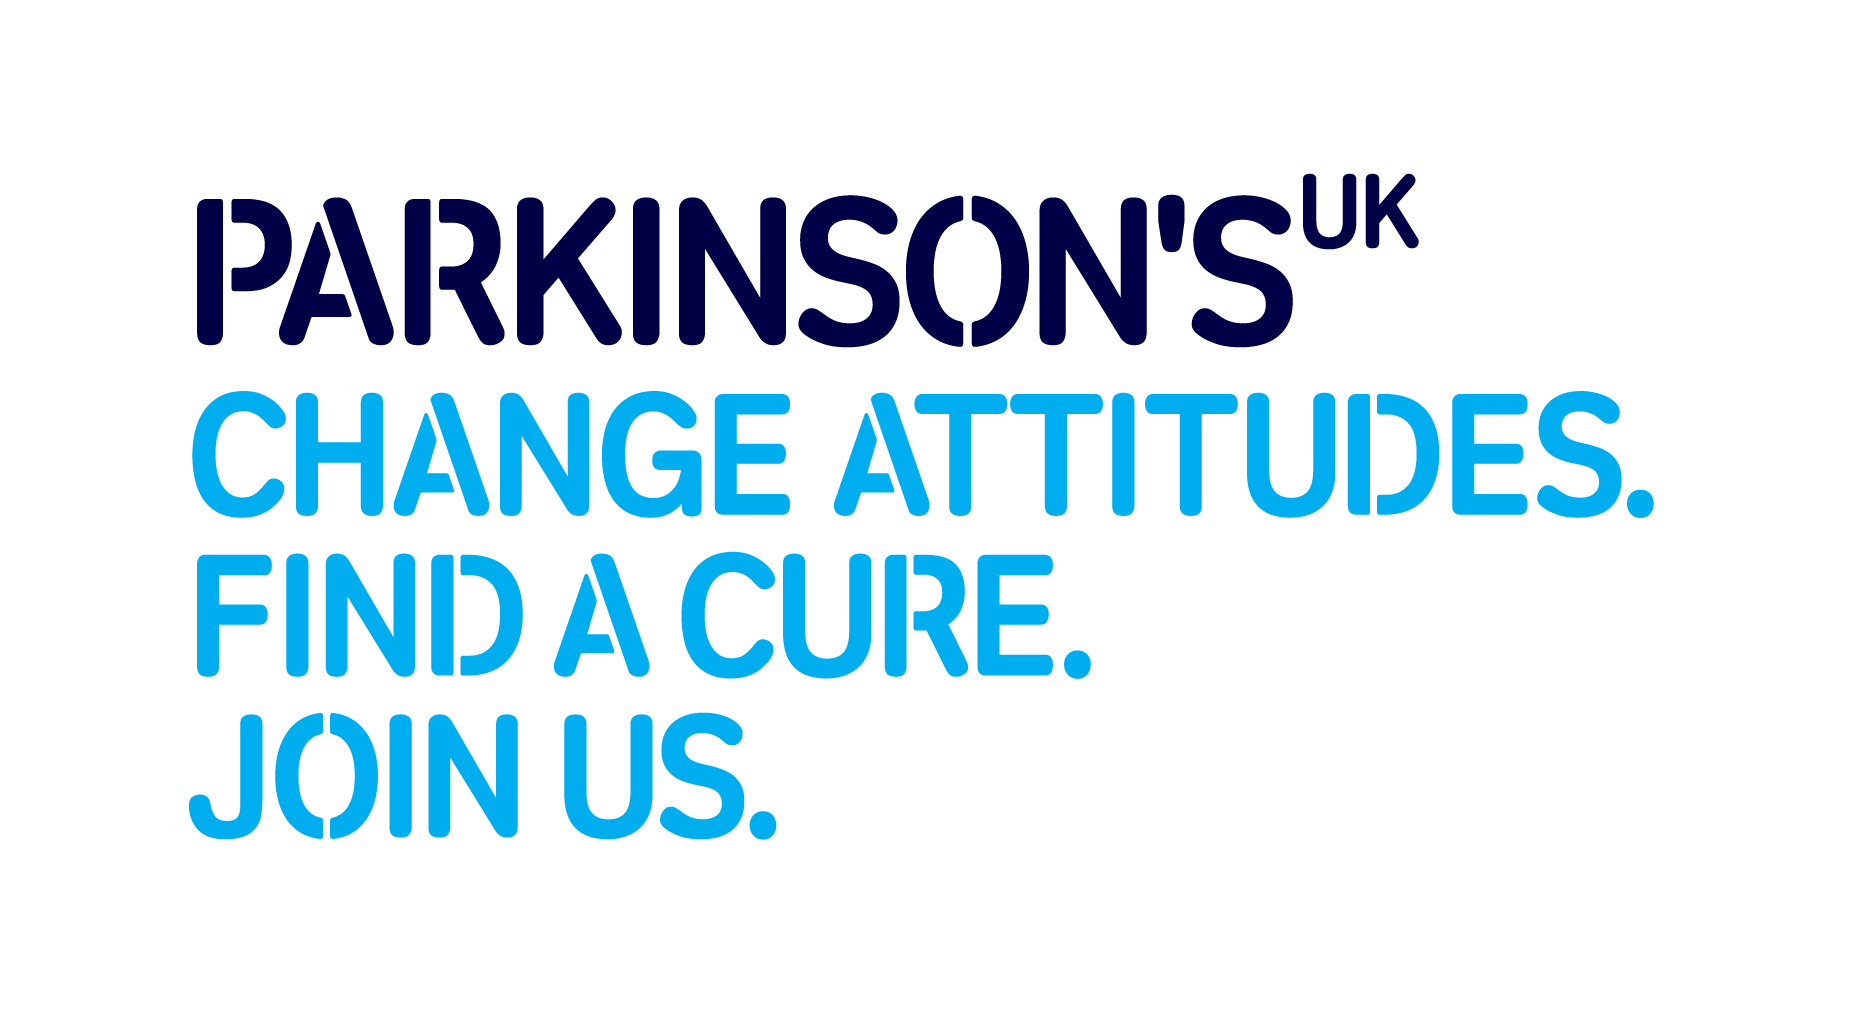 Parkinson's UK, Chand Attitudes. Find a Cure, Join Us. Sign up to the Parkinson's UK Research Support Network to find out about the latest news and more opportunities to get involved in research (link will open in new tab)